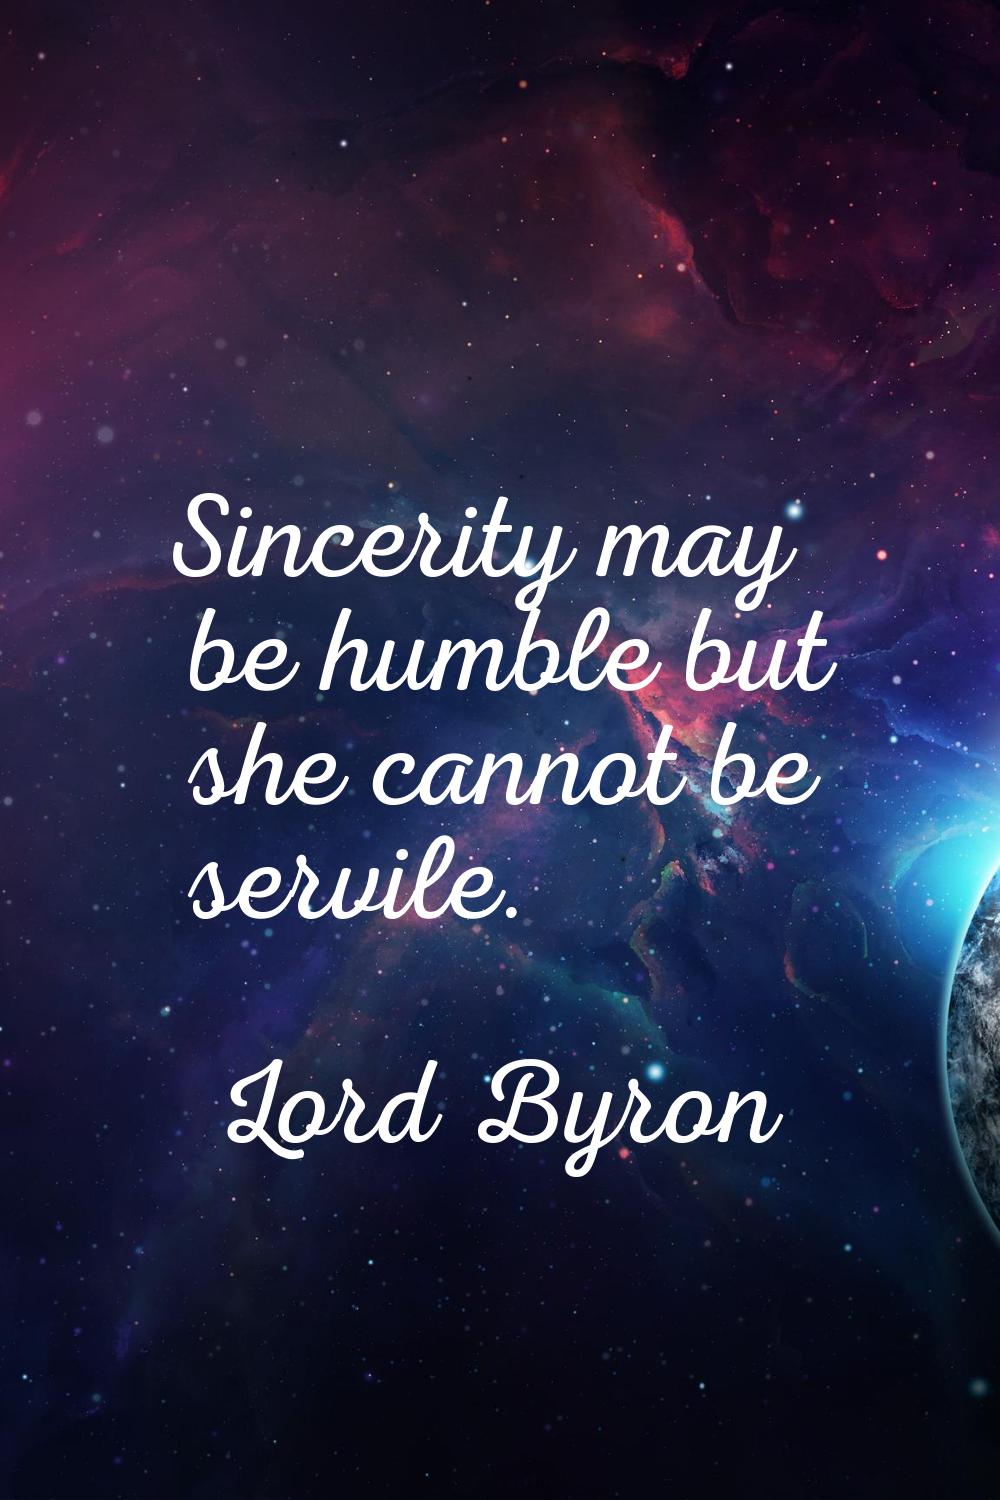 Sincerity may be humble but she cannot be servile.